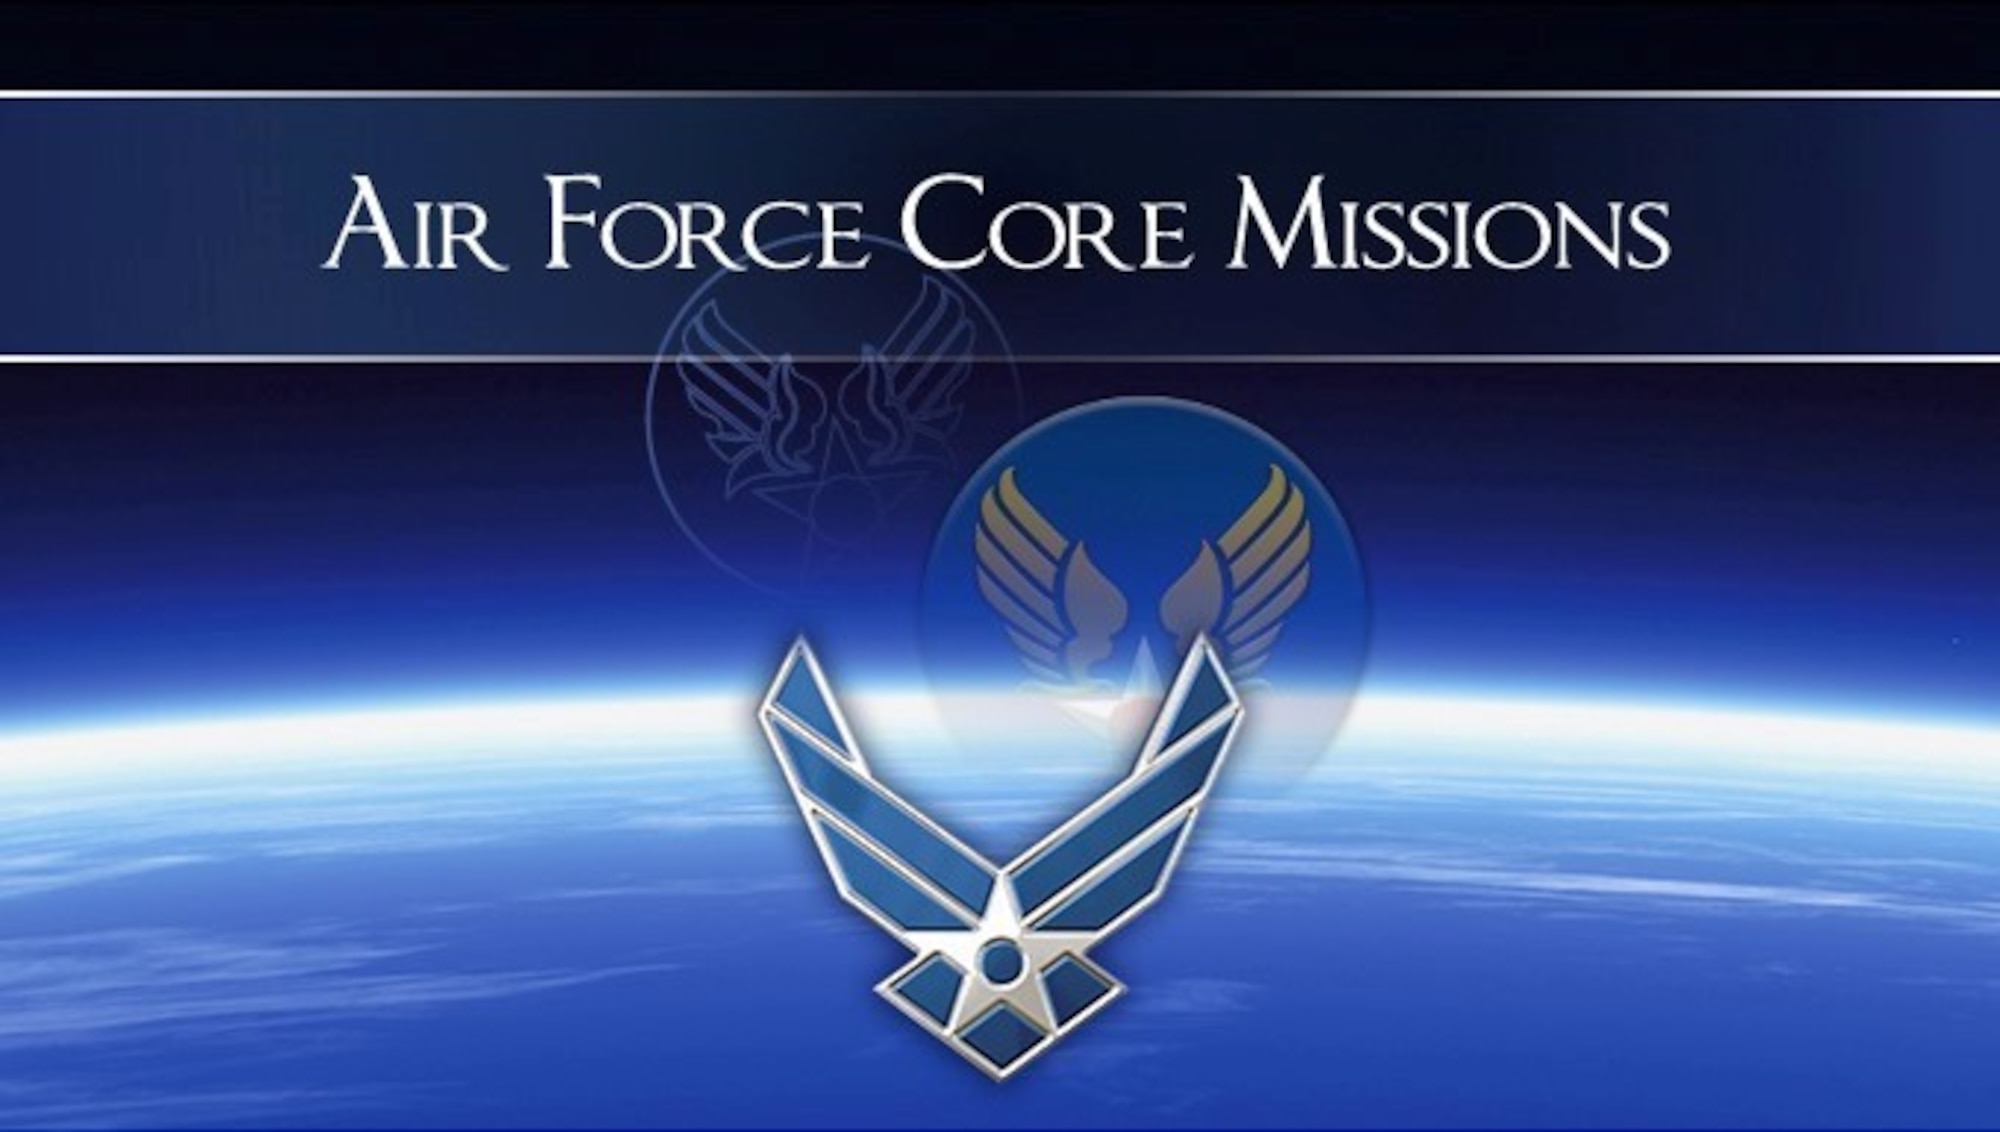 Air Force Core Missions